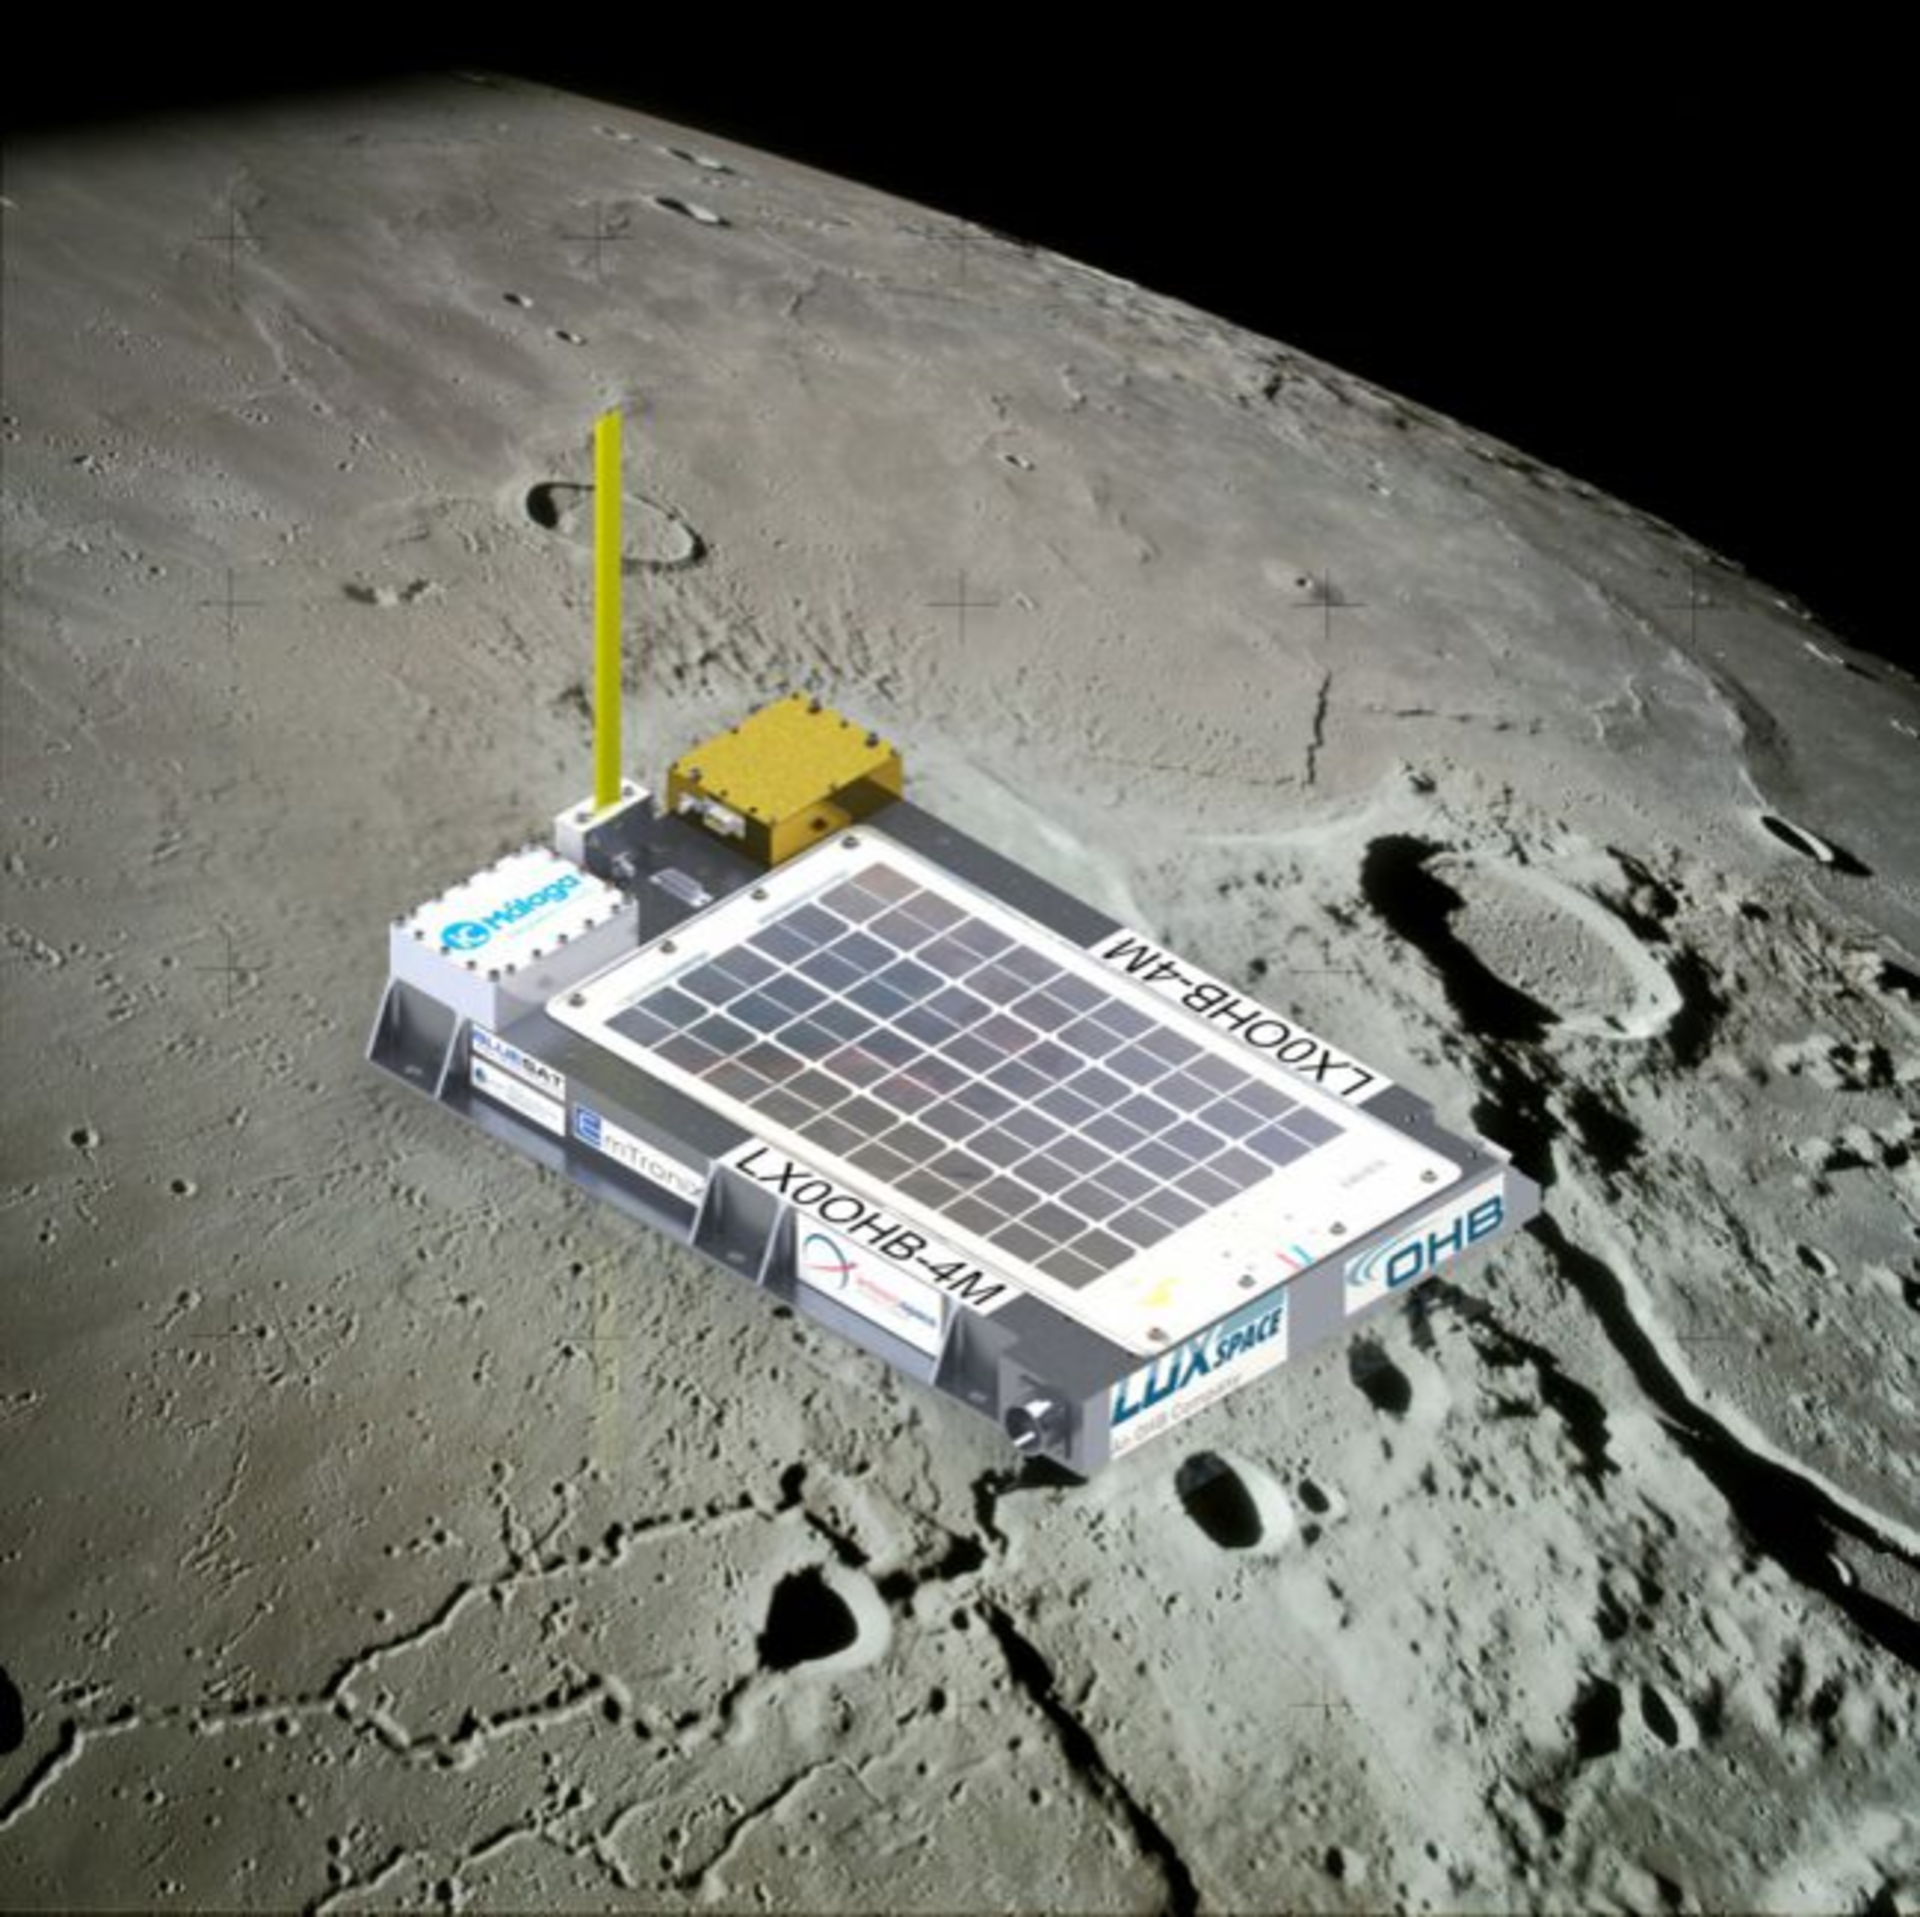 4M Manfred Moon Memorial Mission